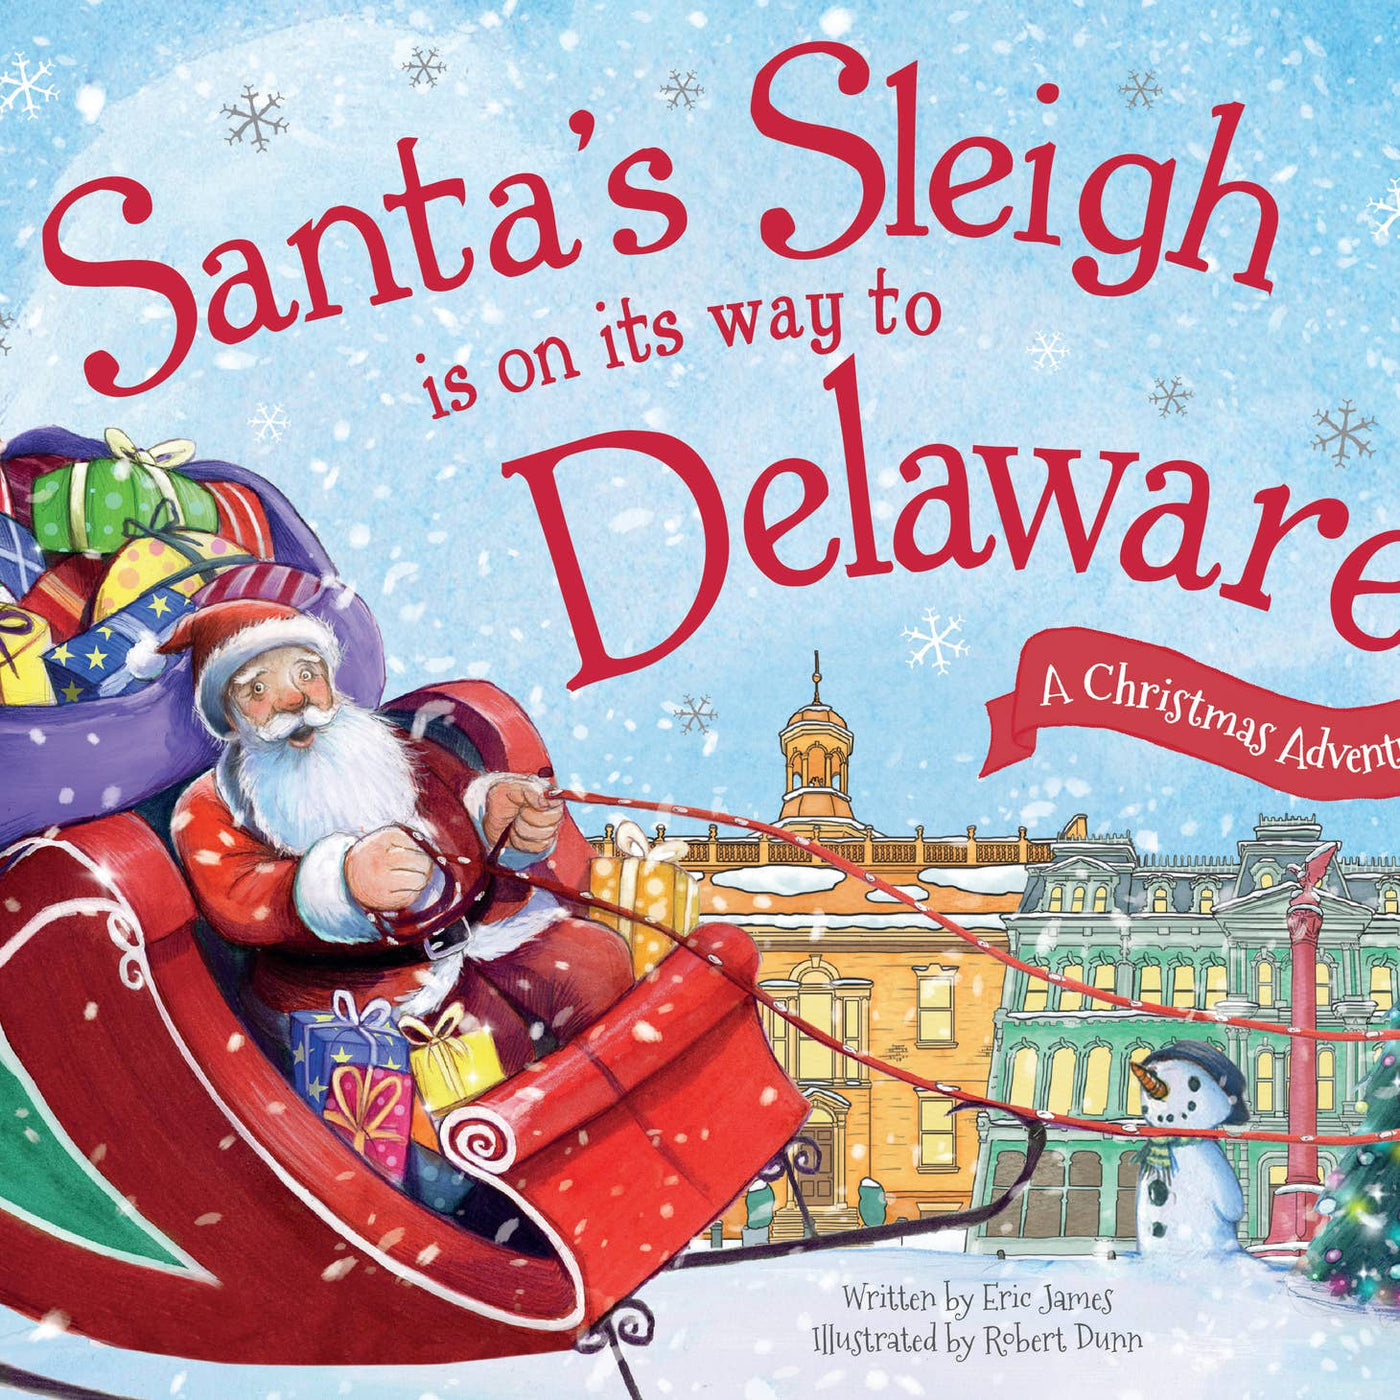 Santa Sleigh is On Its Way To Delaware